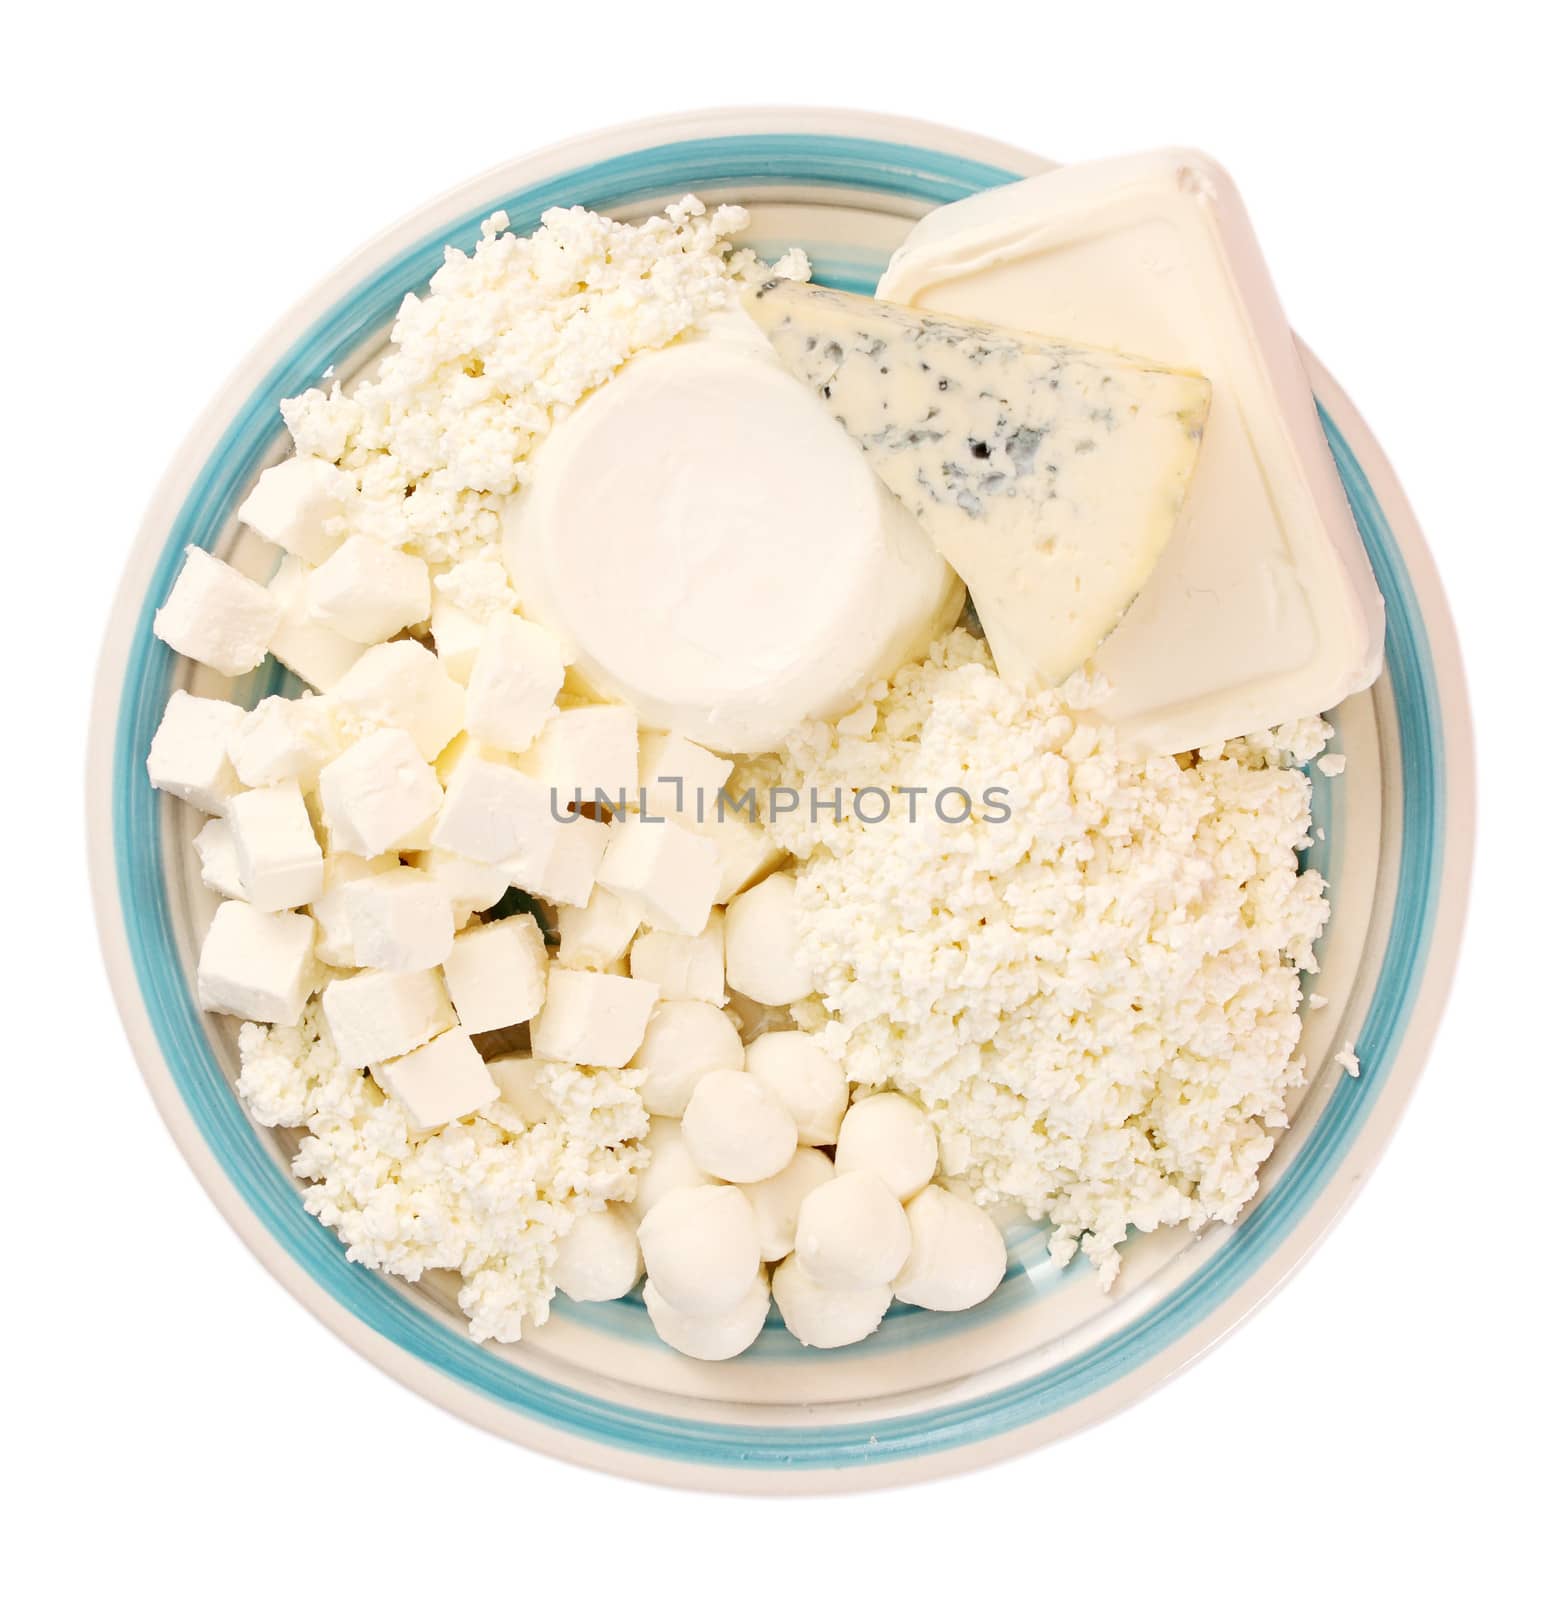 still life of dairy products and soft cheese varieties